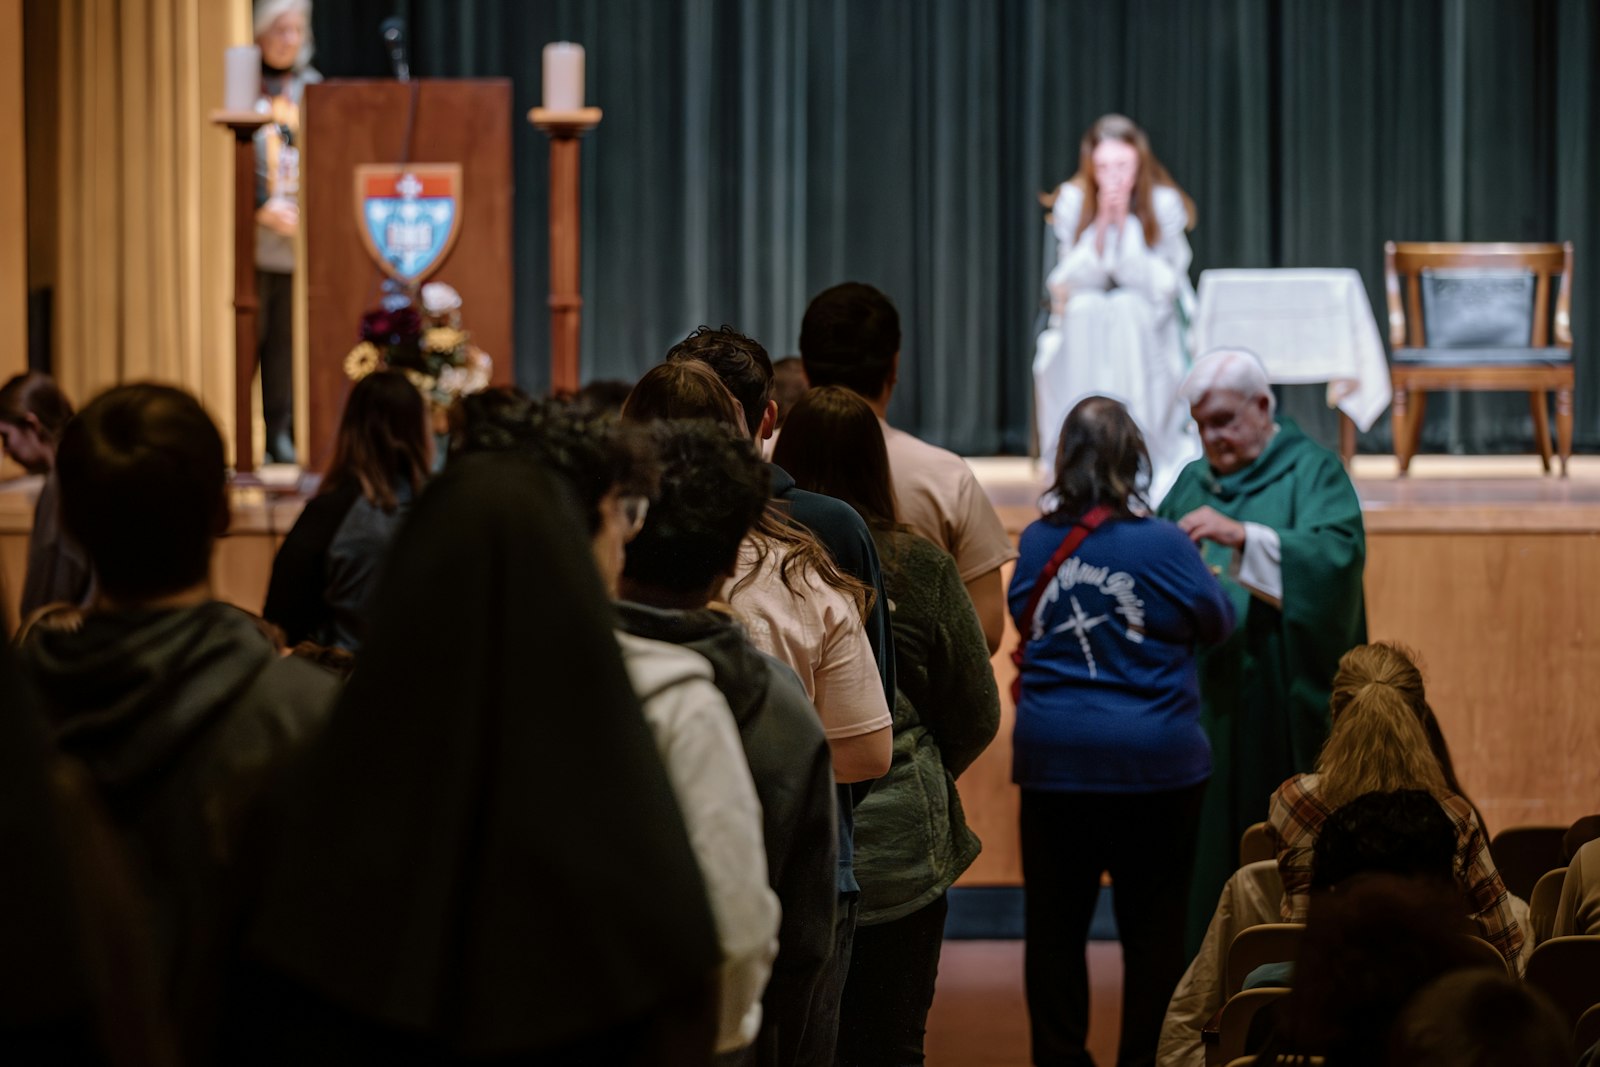 Teens receive Communion during Mass celebrated with Bishop John M. Quinn, retired bishop of Winona-Rochester, Minn., and a former Detroit auxiliary bishop. (Alissa Tuttle | Special to Detroit Catholic)